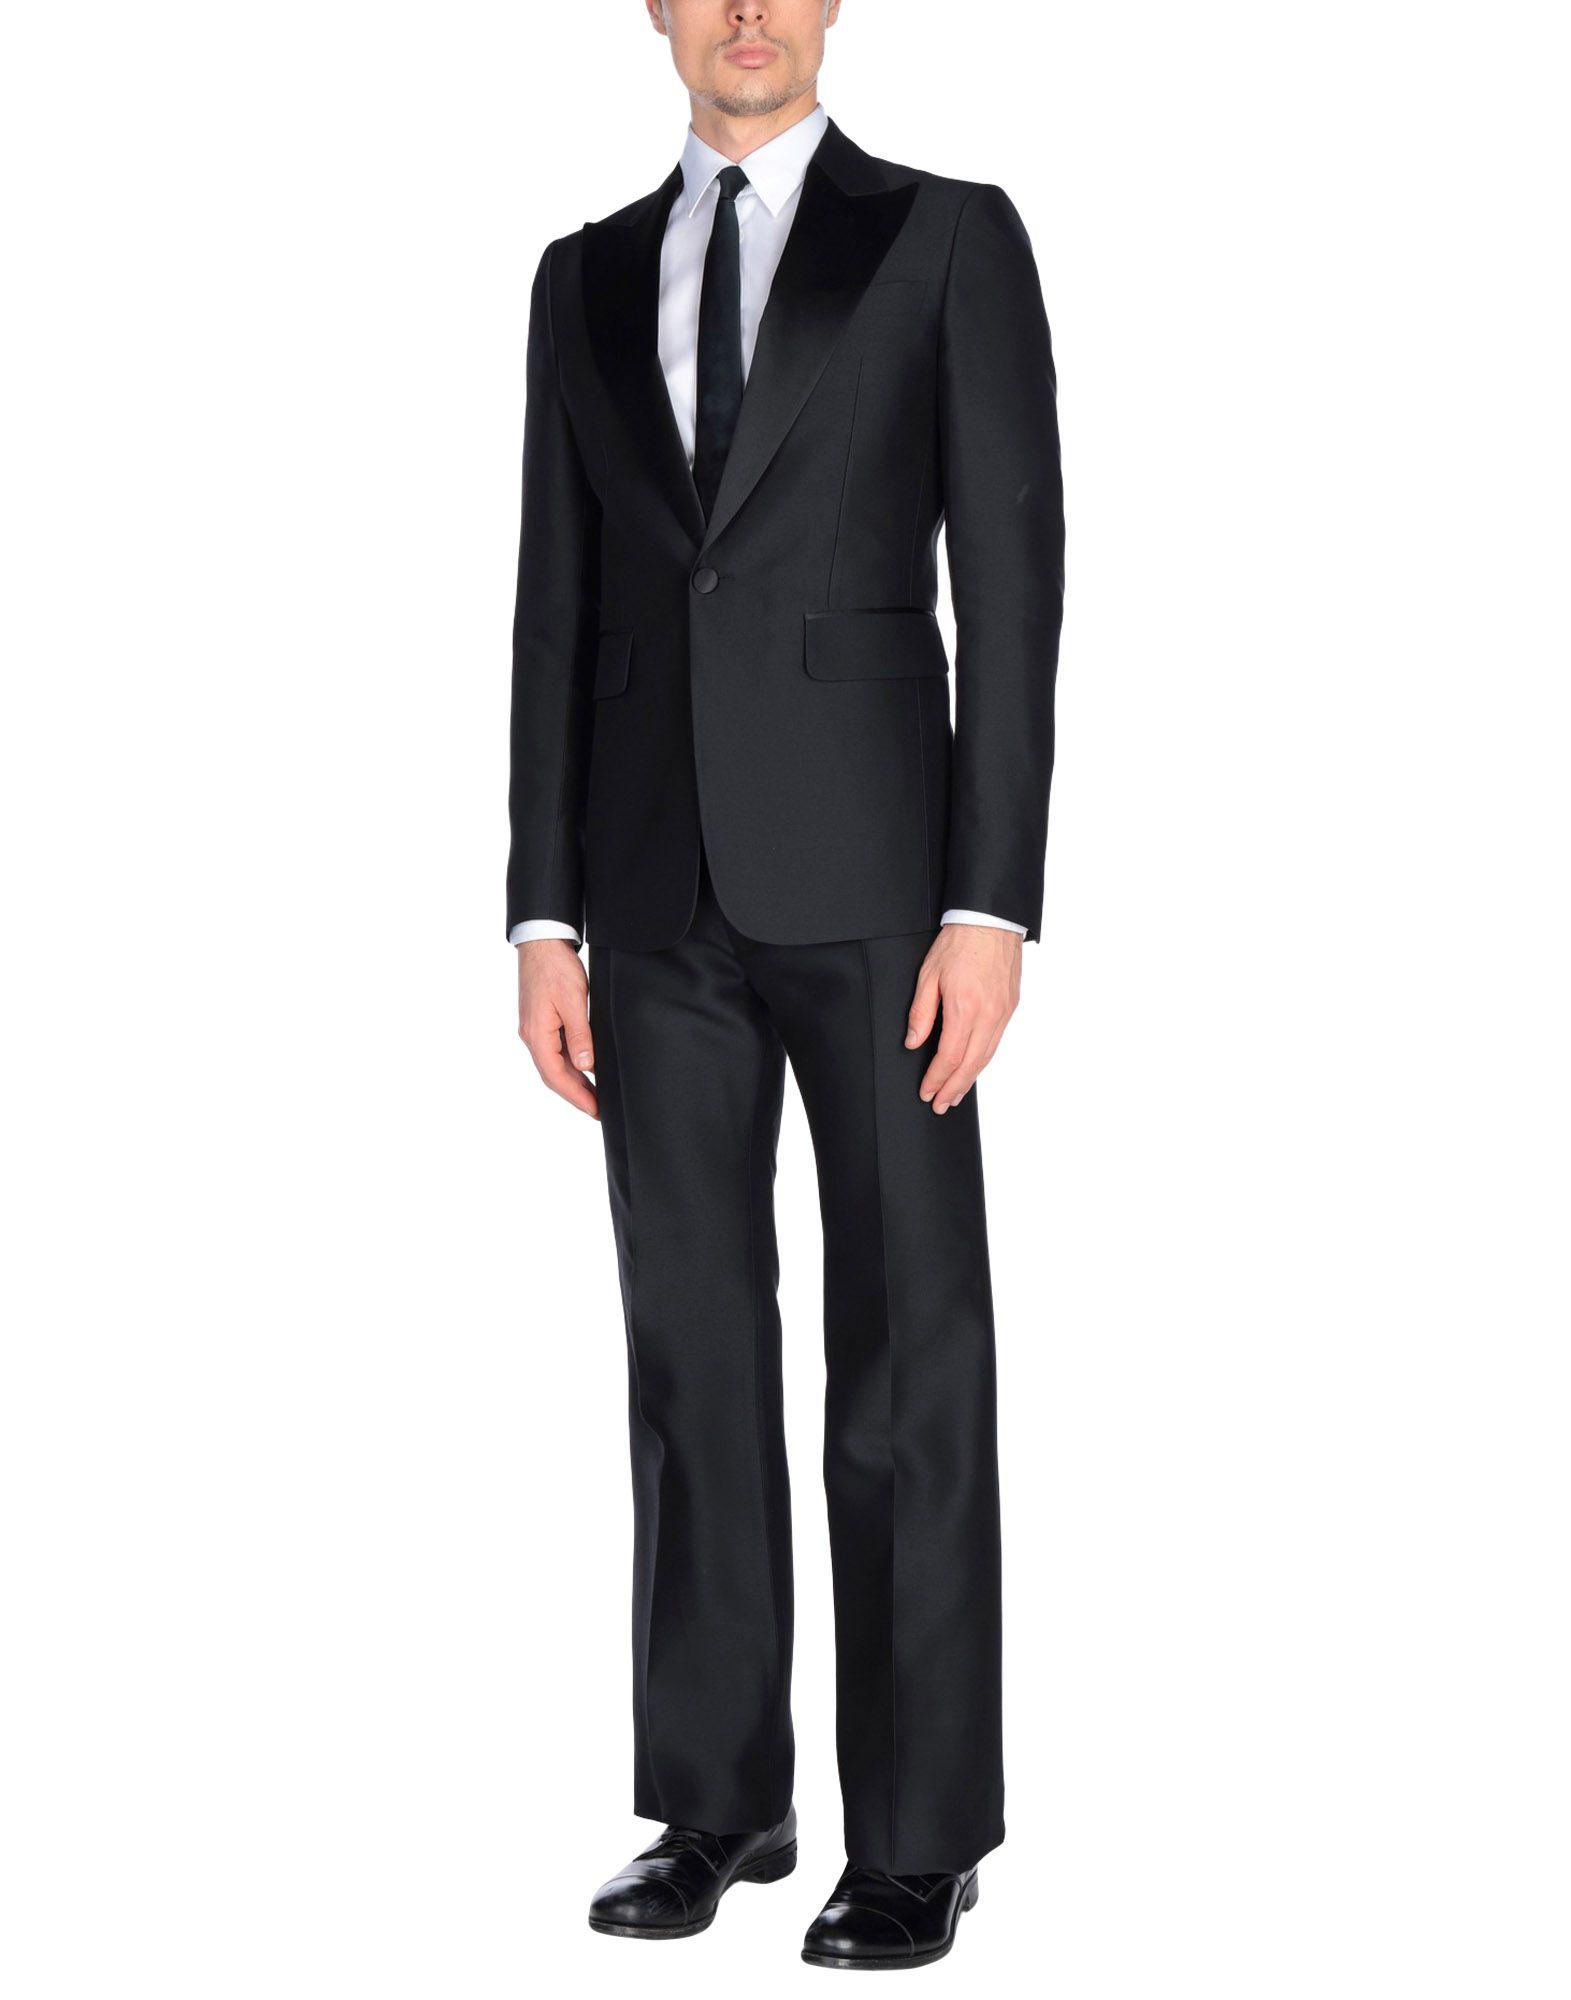 DSquared² Wool Suit in Black for Men - Lyst